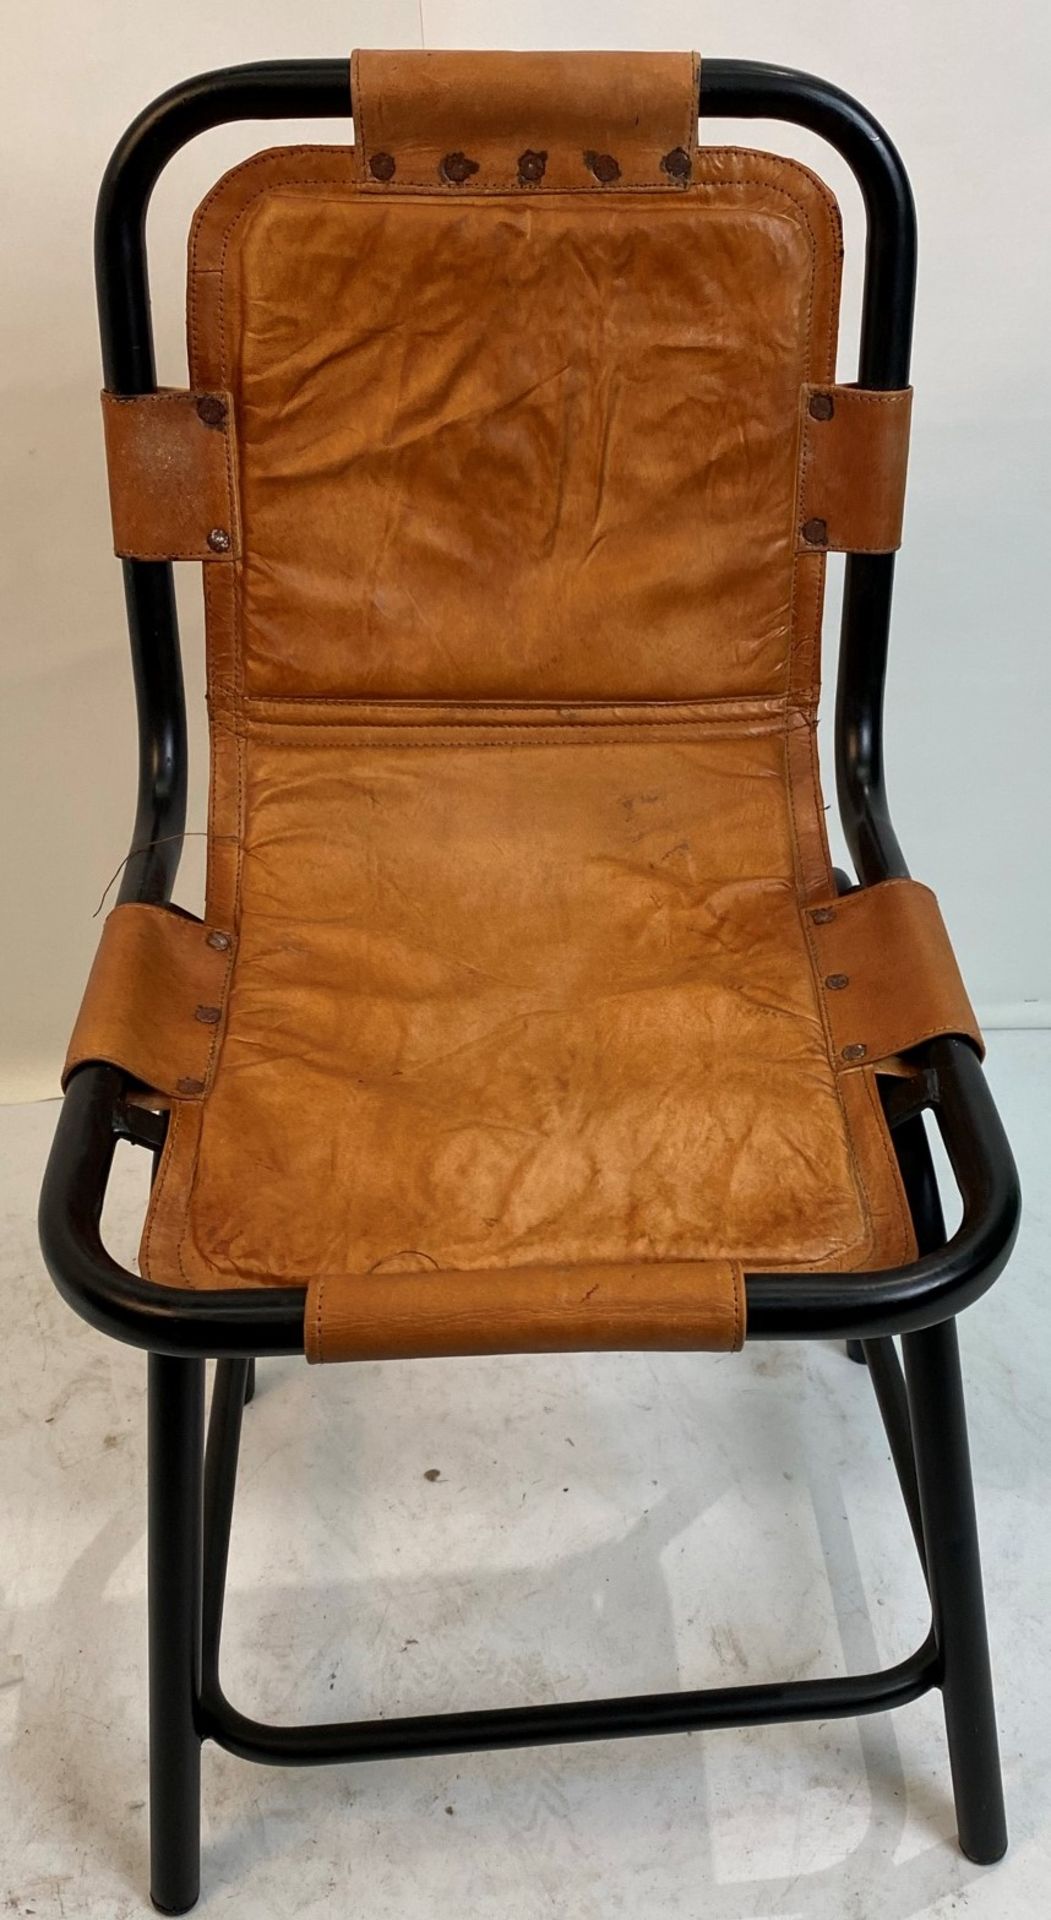 3 x Leather Low Stool Saddle Side Chairs with black metal frames- Please note studs on opened